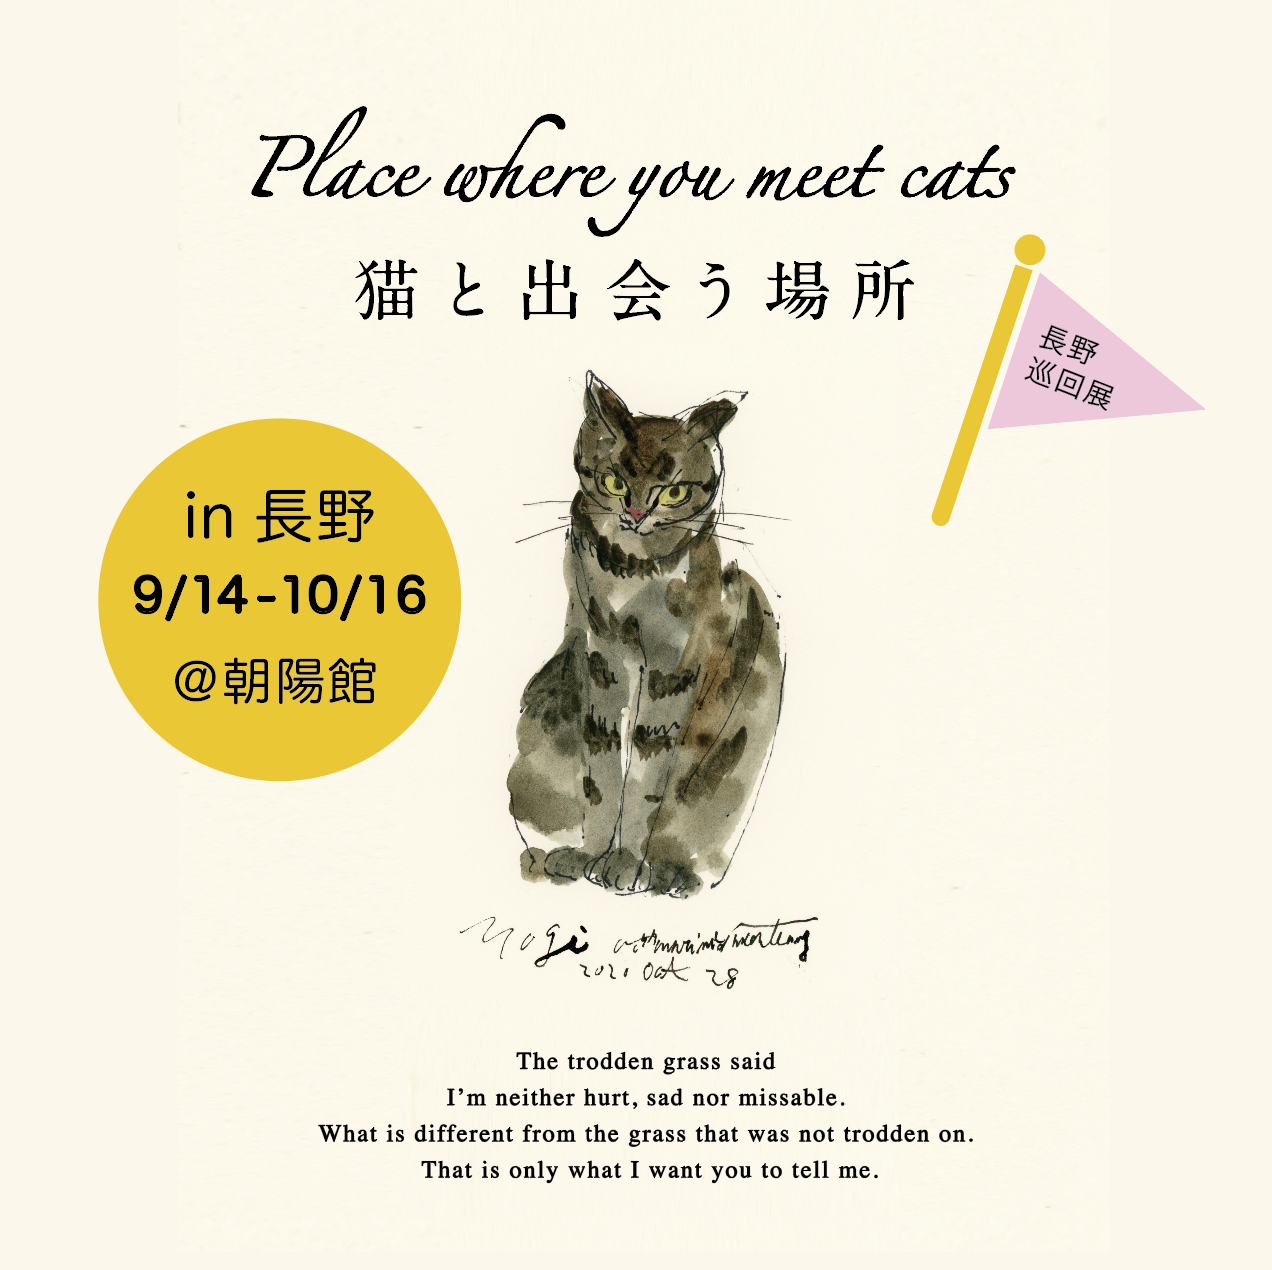 「Place where you meet cats 猫と出会う場所 in 長野巡回展」